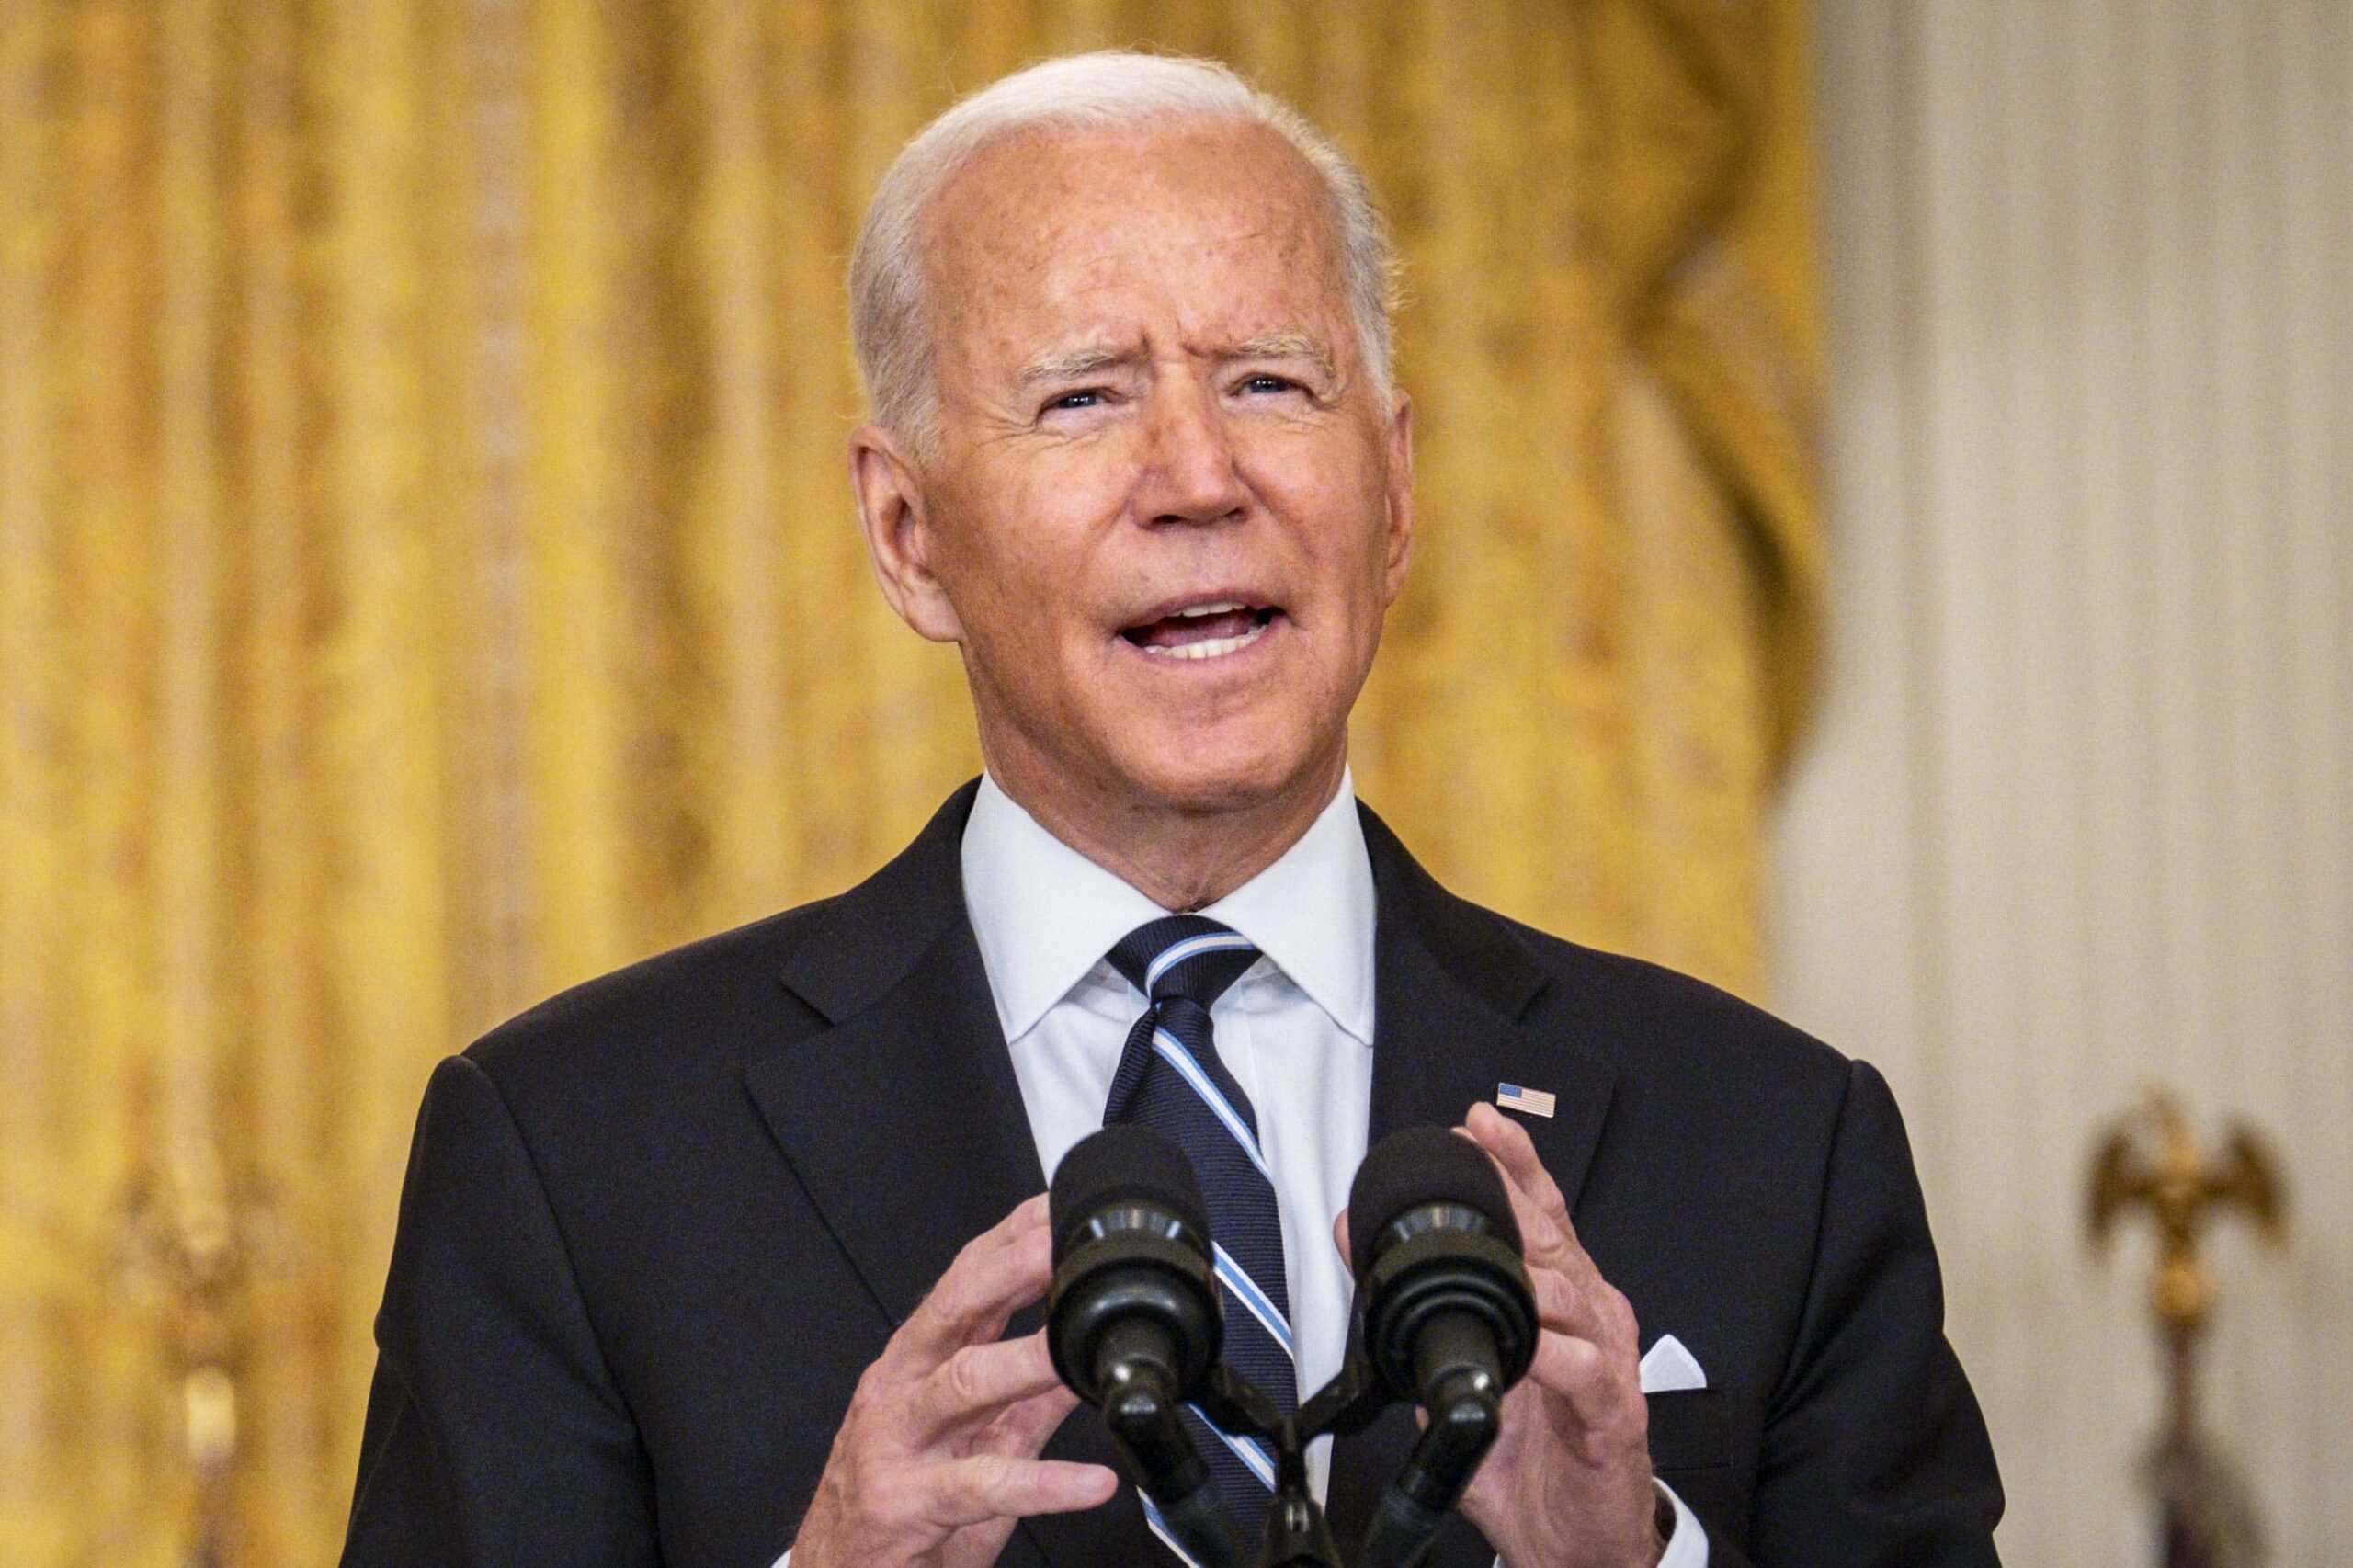 ‘Please get vaccinated now,’ Biden urges after FDA approves Pfizer Covid photographs